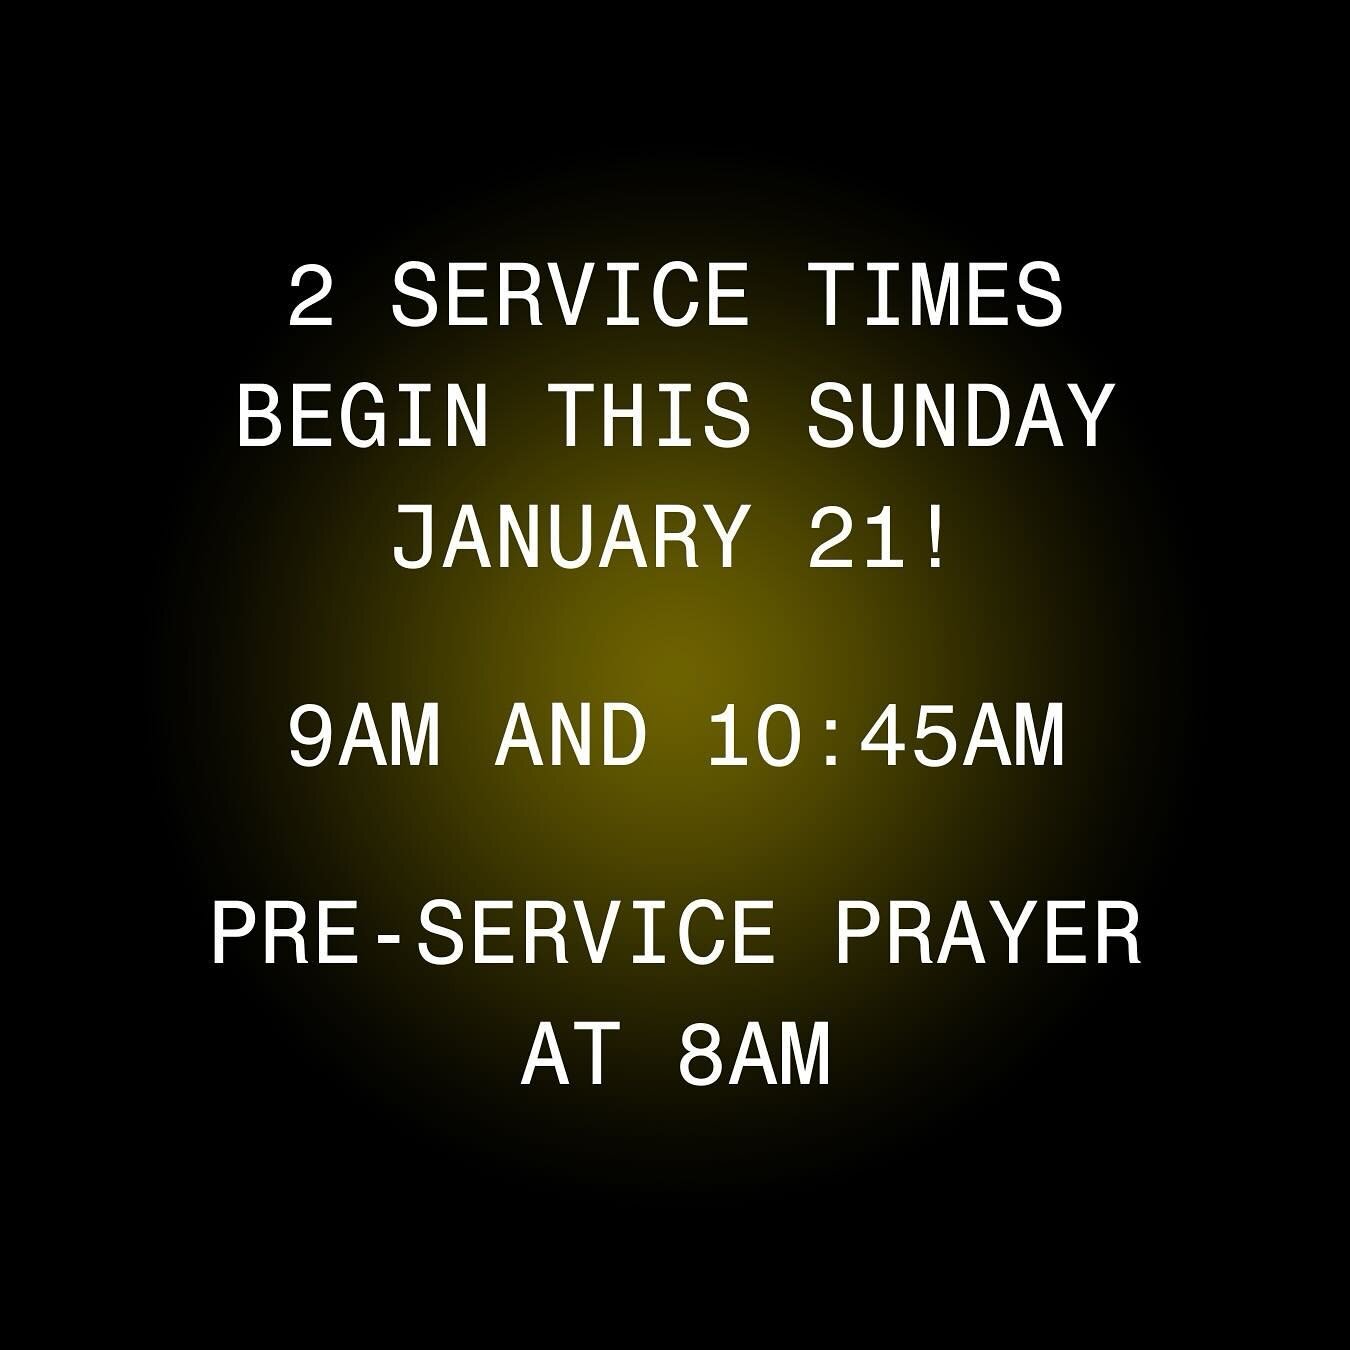 Two services launch this week at 9am and 10:45am. Pre-service prayer will be at 8am. We have such expectancy&nbsp;for the ways God is going to move in and through the people of Bright City as we create more space to see&nbsp;the light, be&nbsp;the li